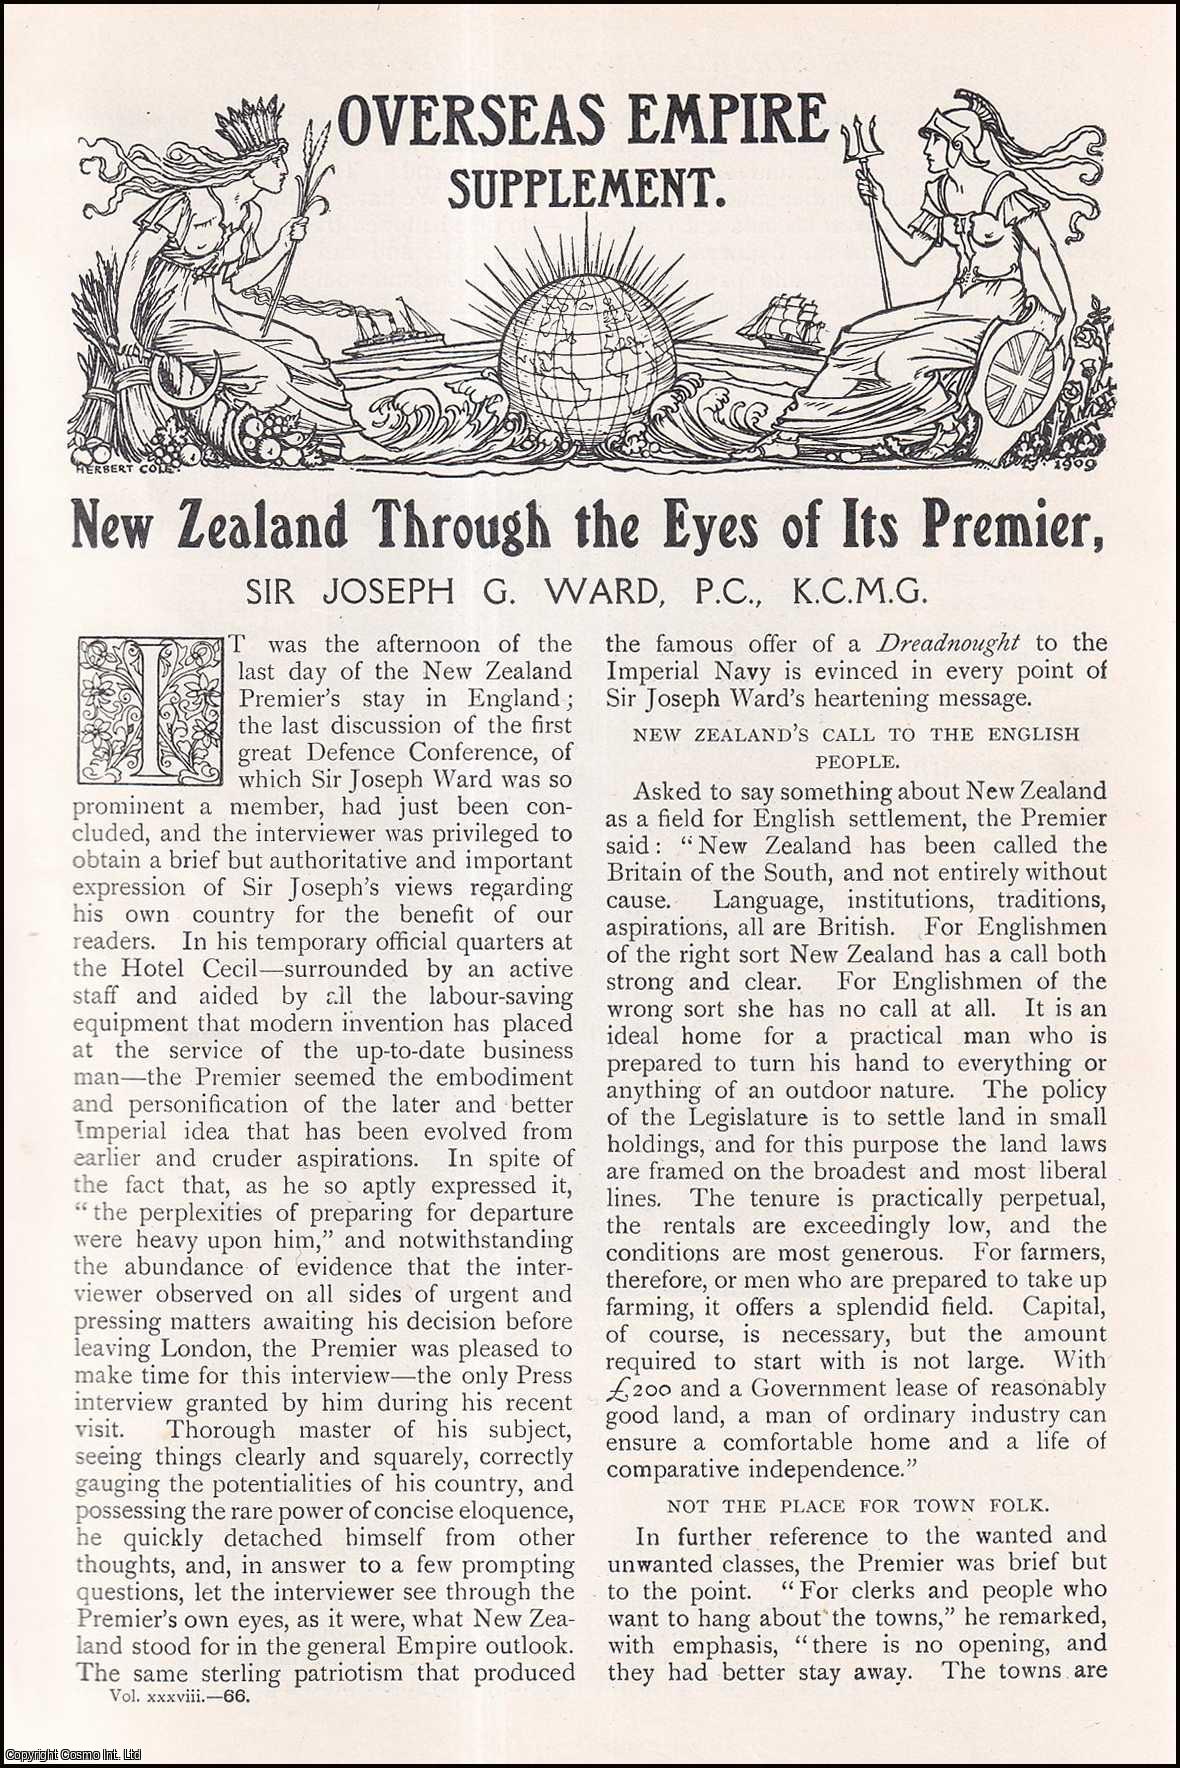 --- - New Zealand Through the Eyes of Its Premier, Sir Joseph G. Ward. A rare original article from The Strand Magazine, 1909.